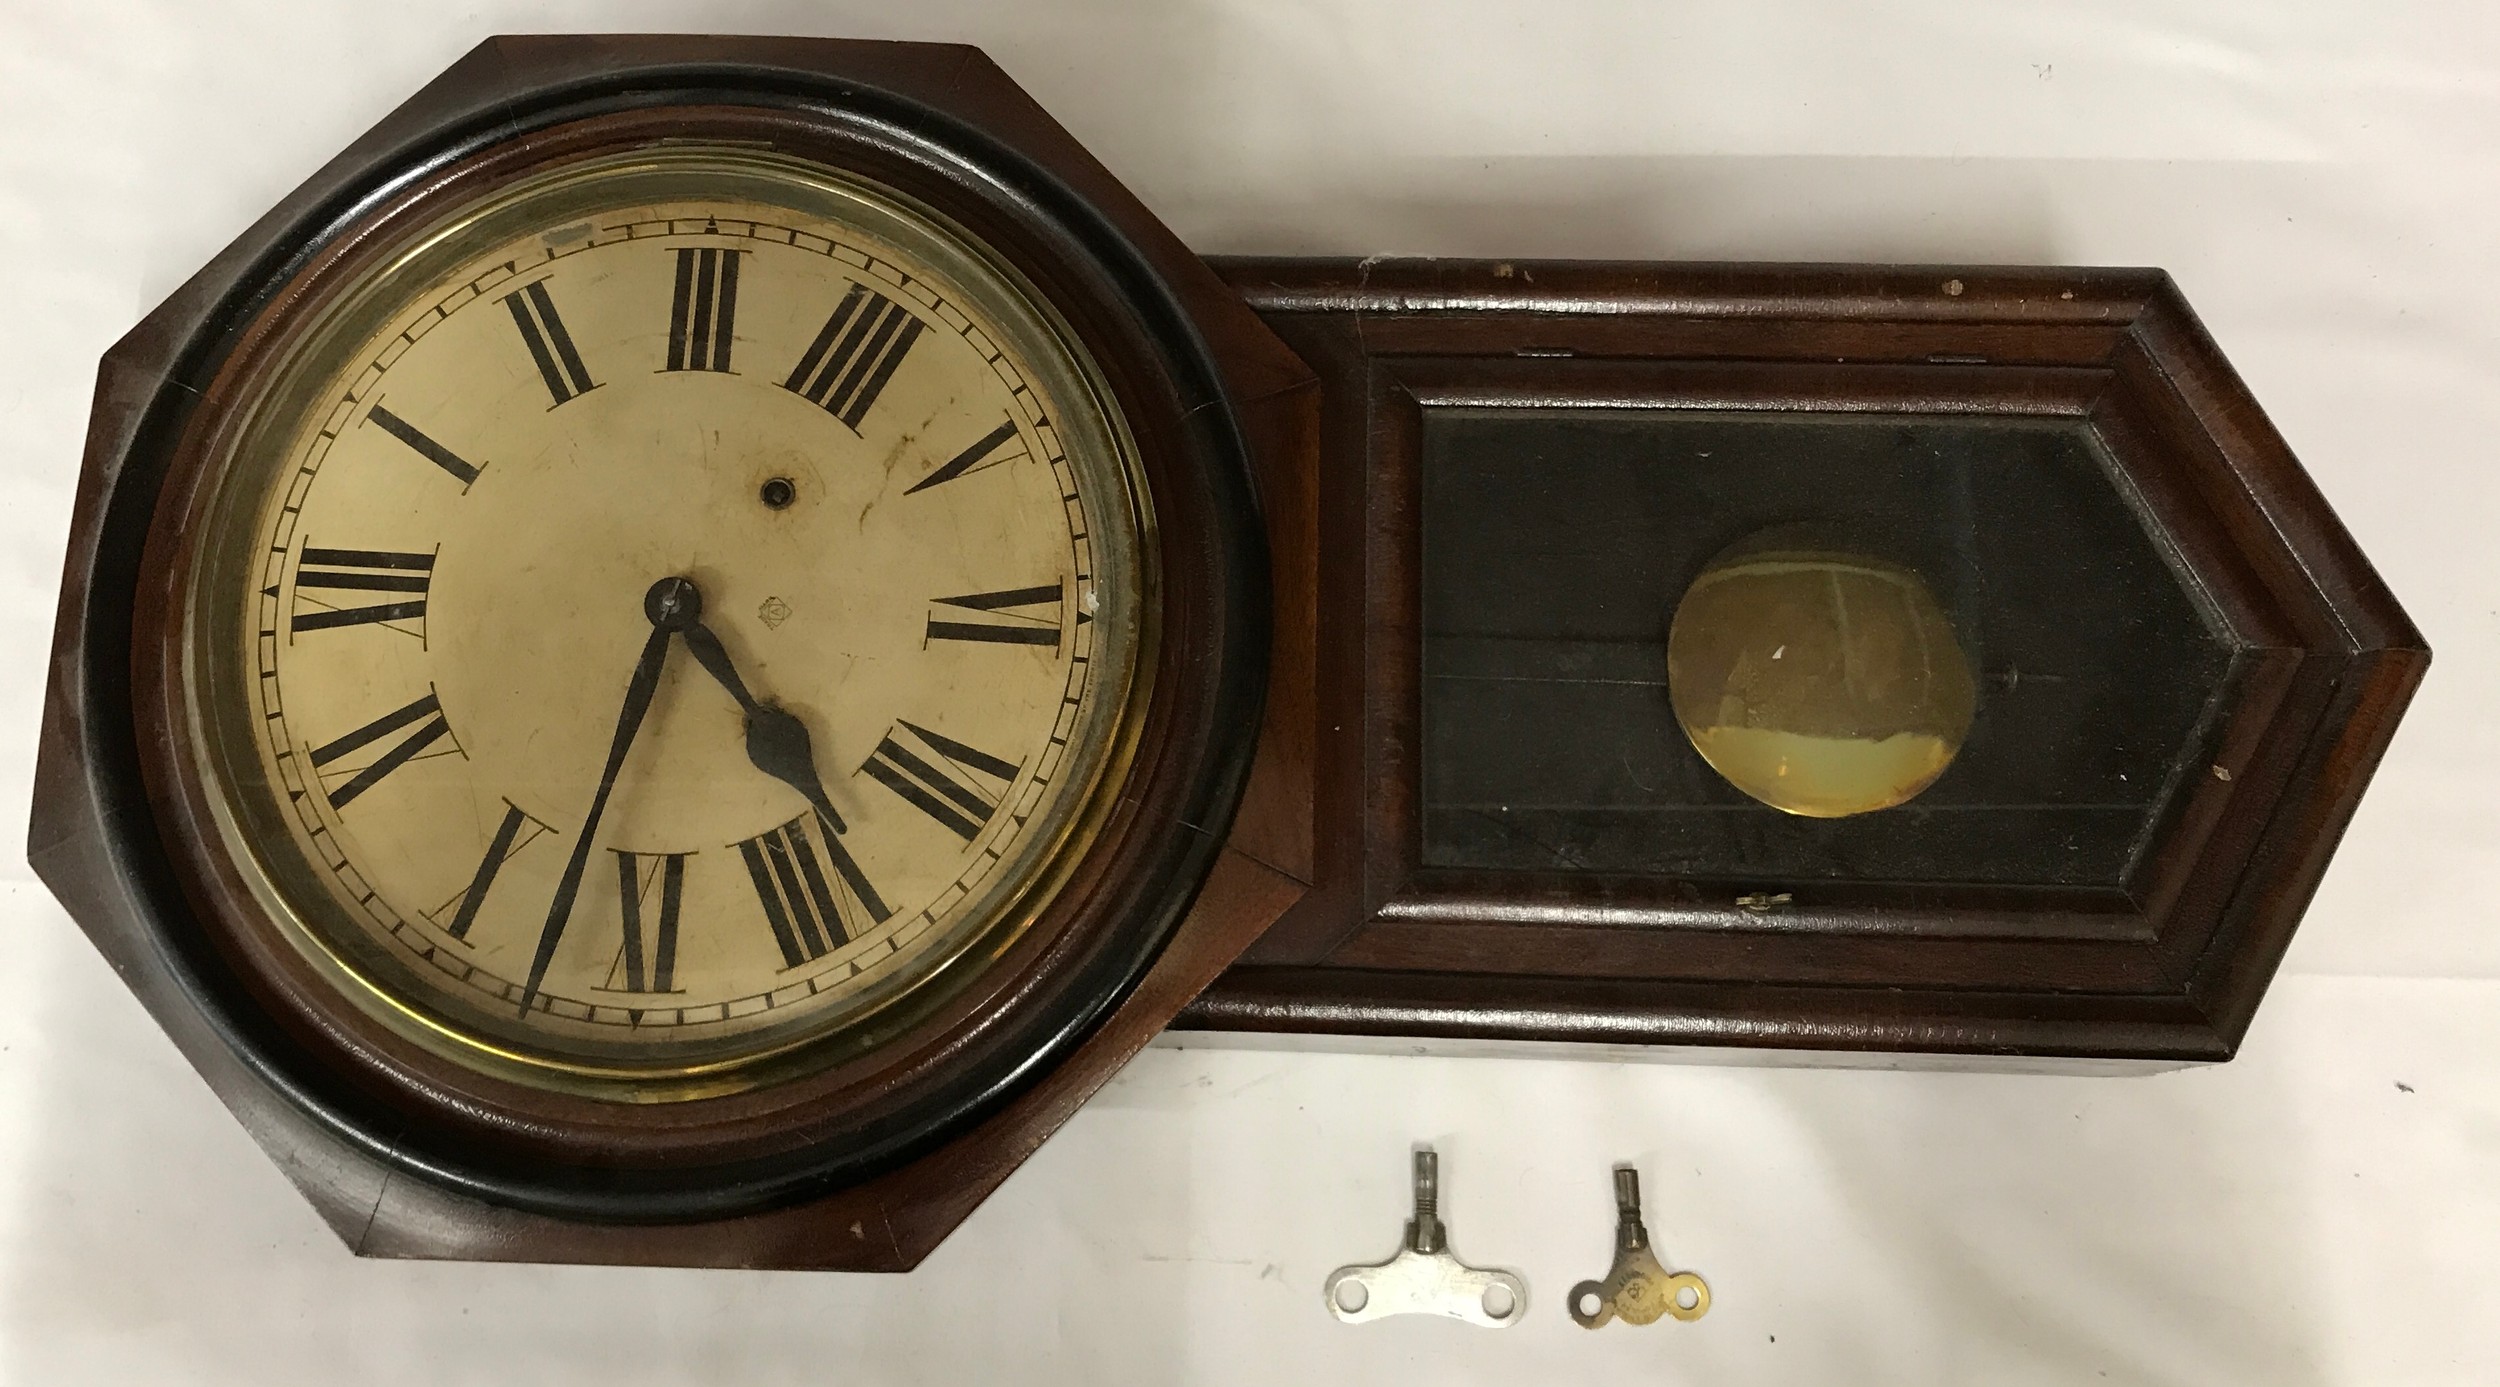 An American regulator cycle 8-day wall clock in octagonal wooden case with metal face using roman